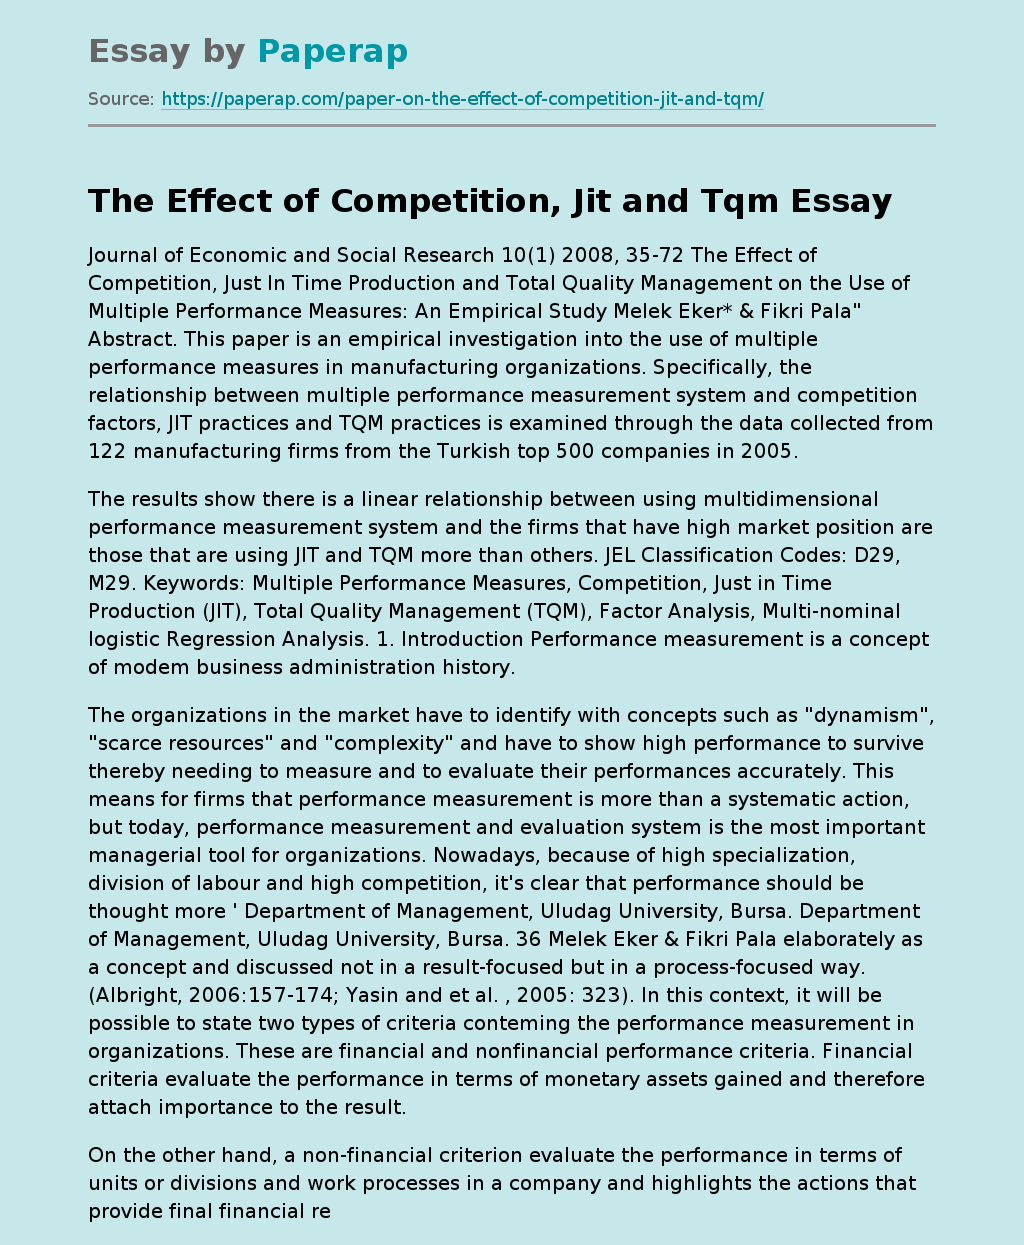 The Effect of Competition, Jit and Tqm